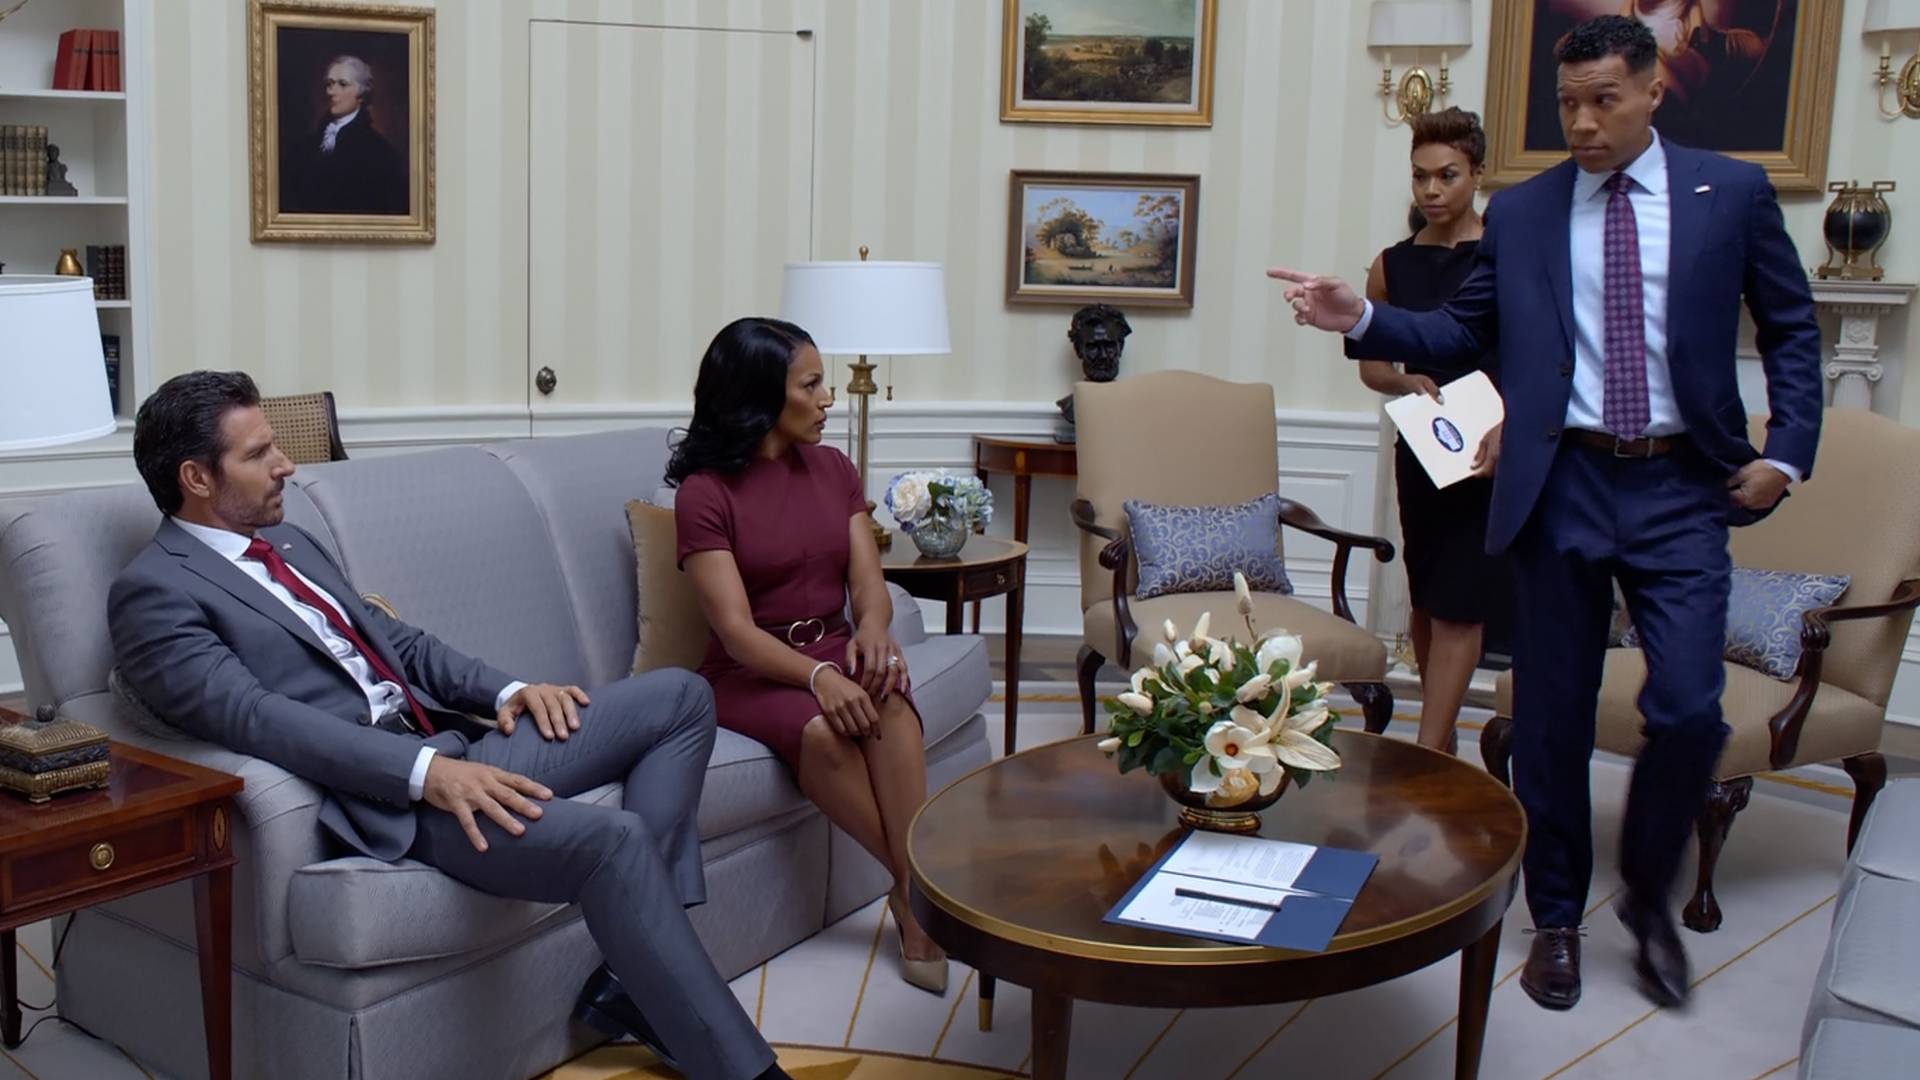 Word of Gayle's emancipation efforts reaches the Oval Office, Sam attempts to clear Barry's name, Kyle tries to gain Max's trust, and Hunter has plans for a White House aide on BET's The Oval.